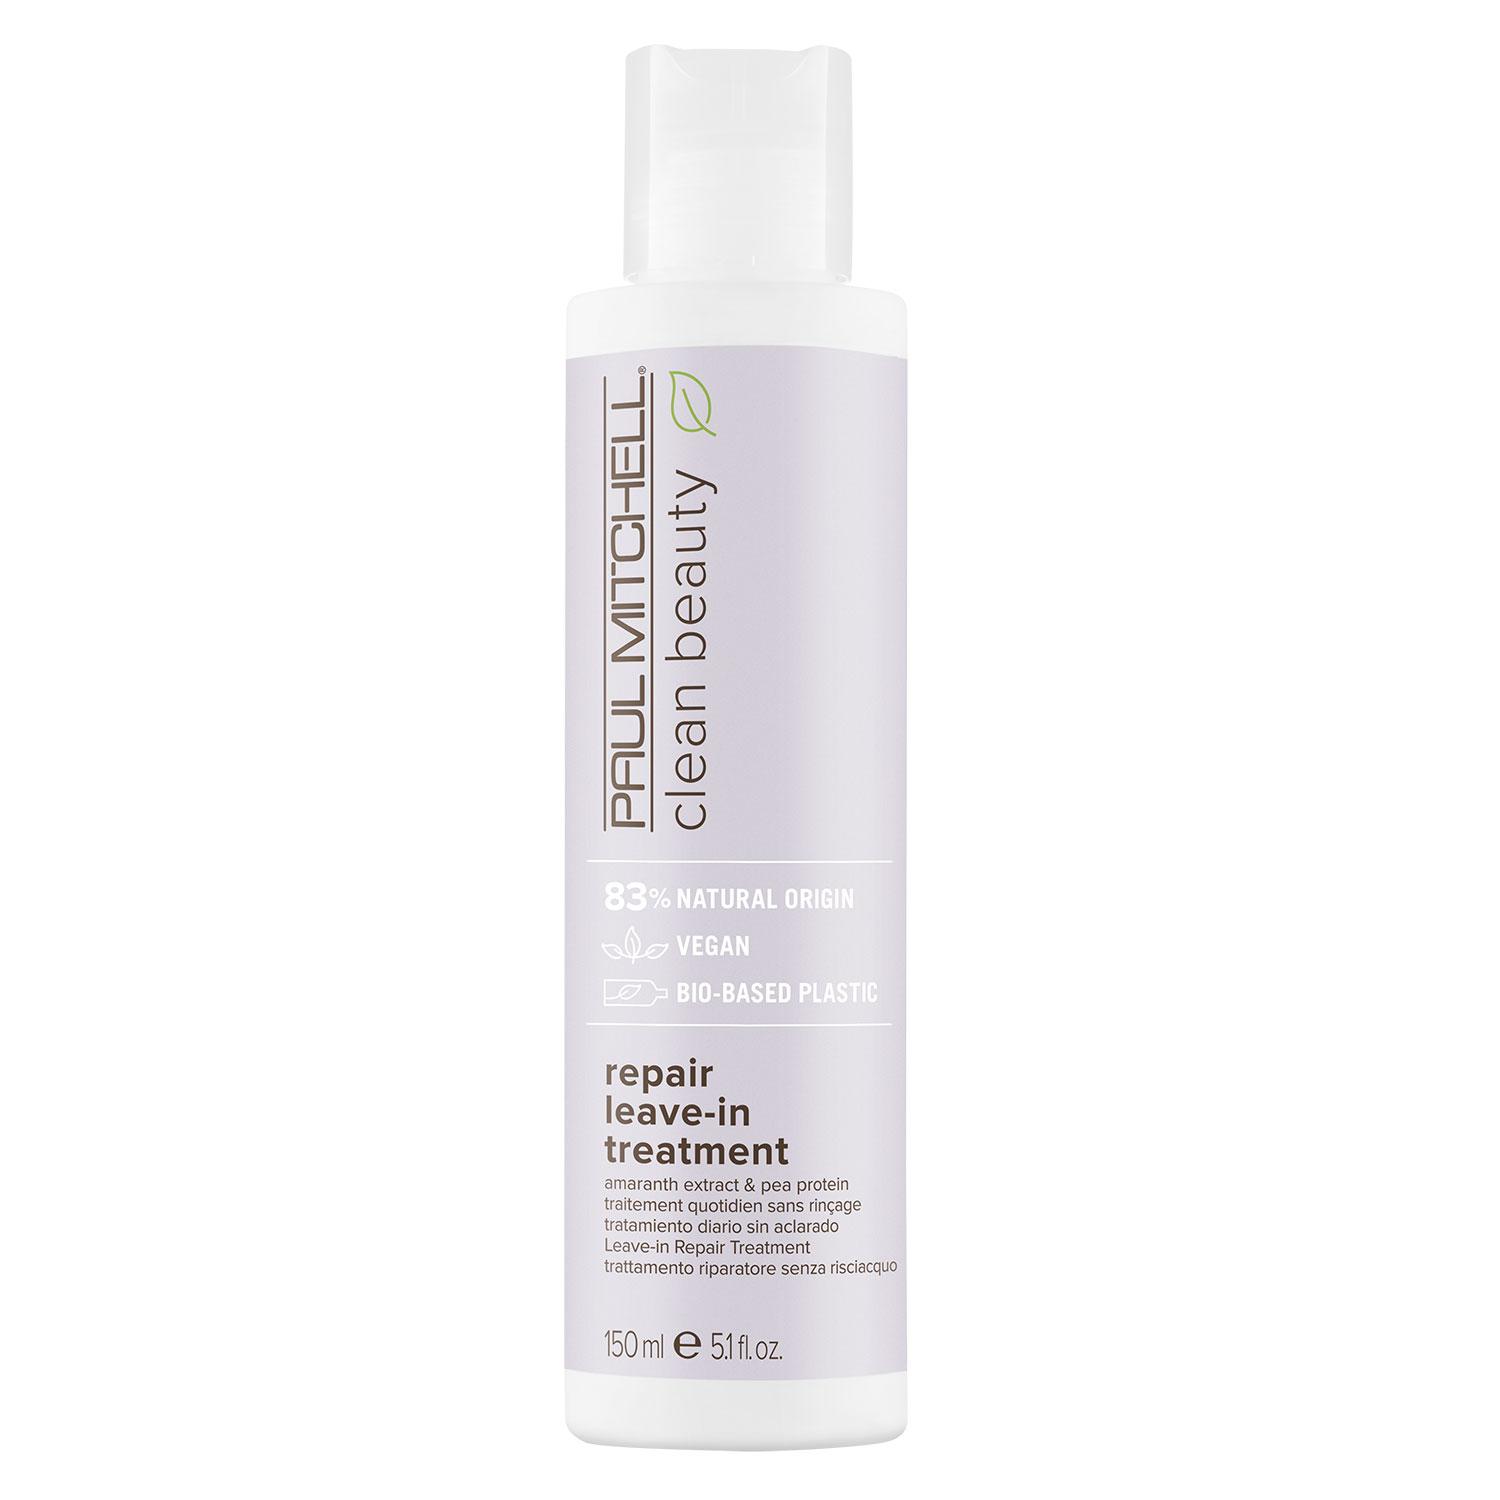 Paul Mitchell Clean Beauty - Repair Leave-In Treatment